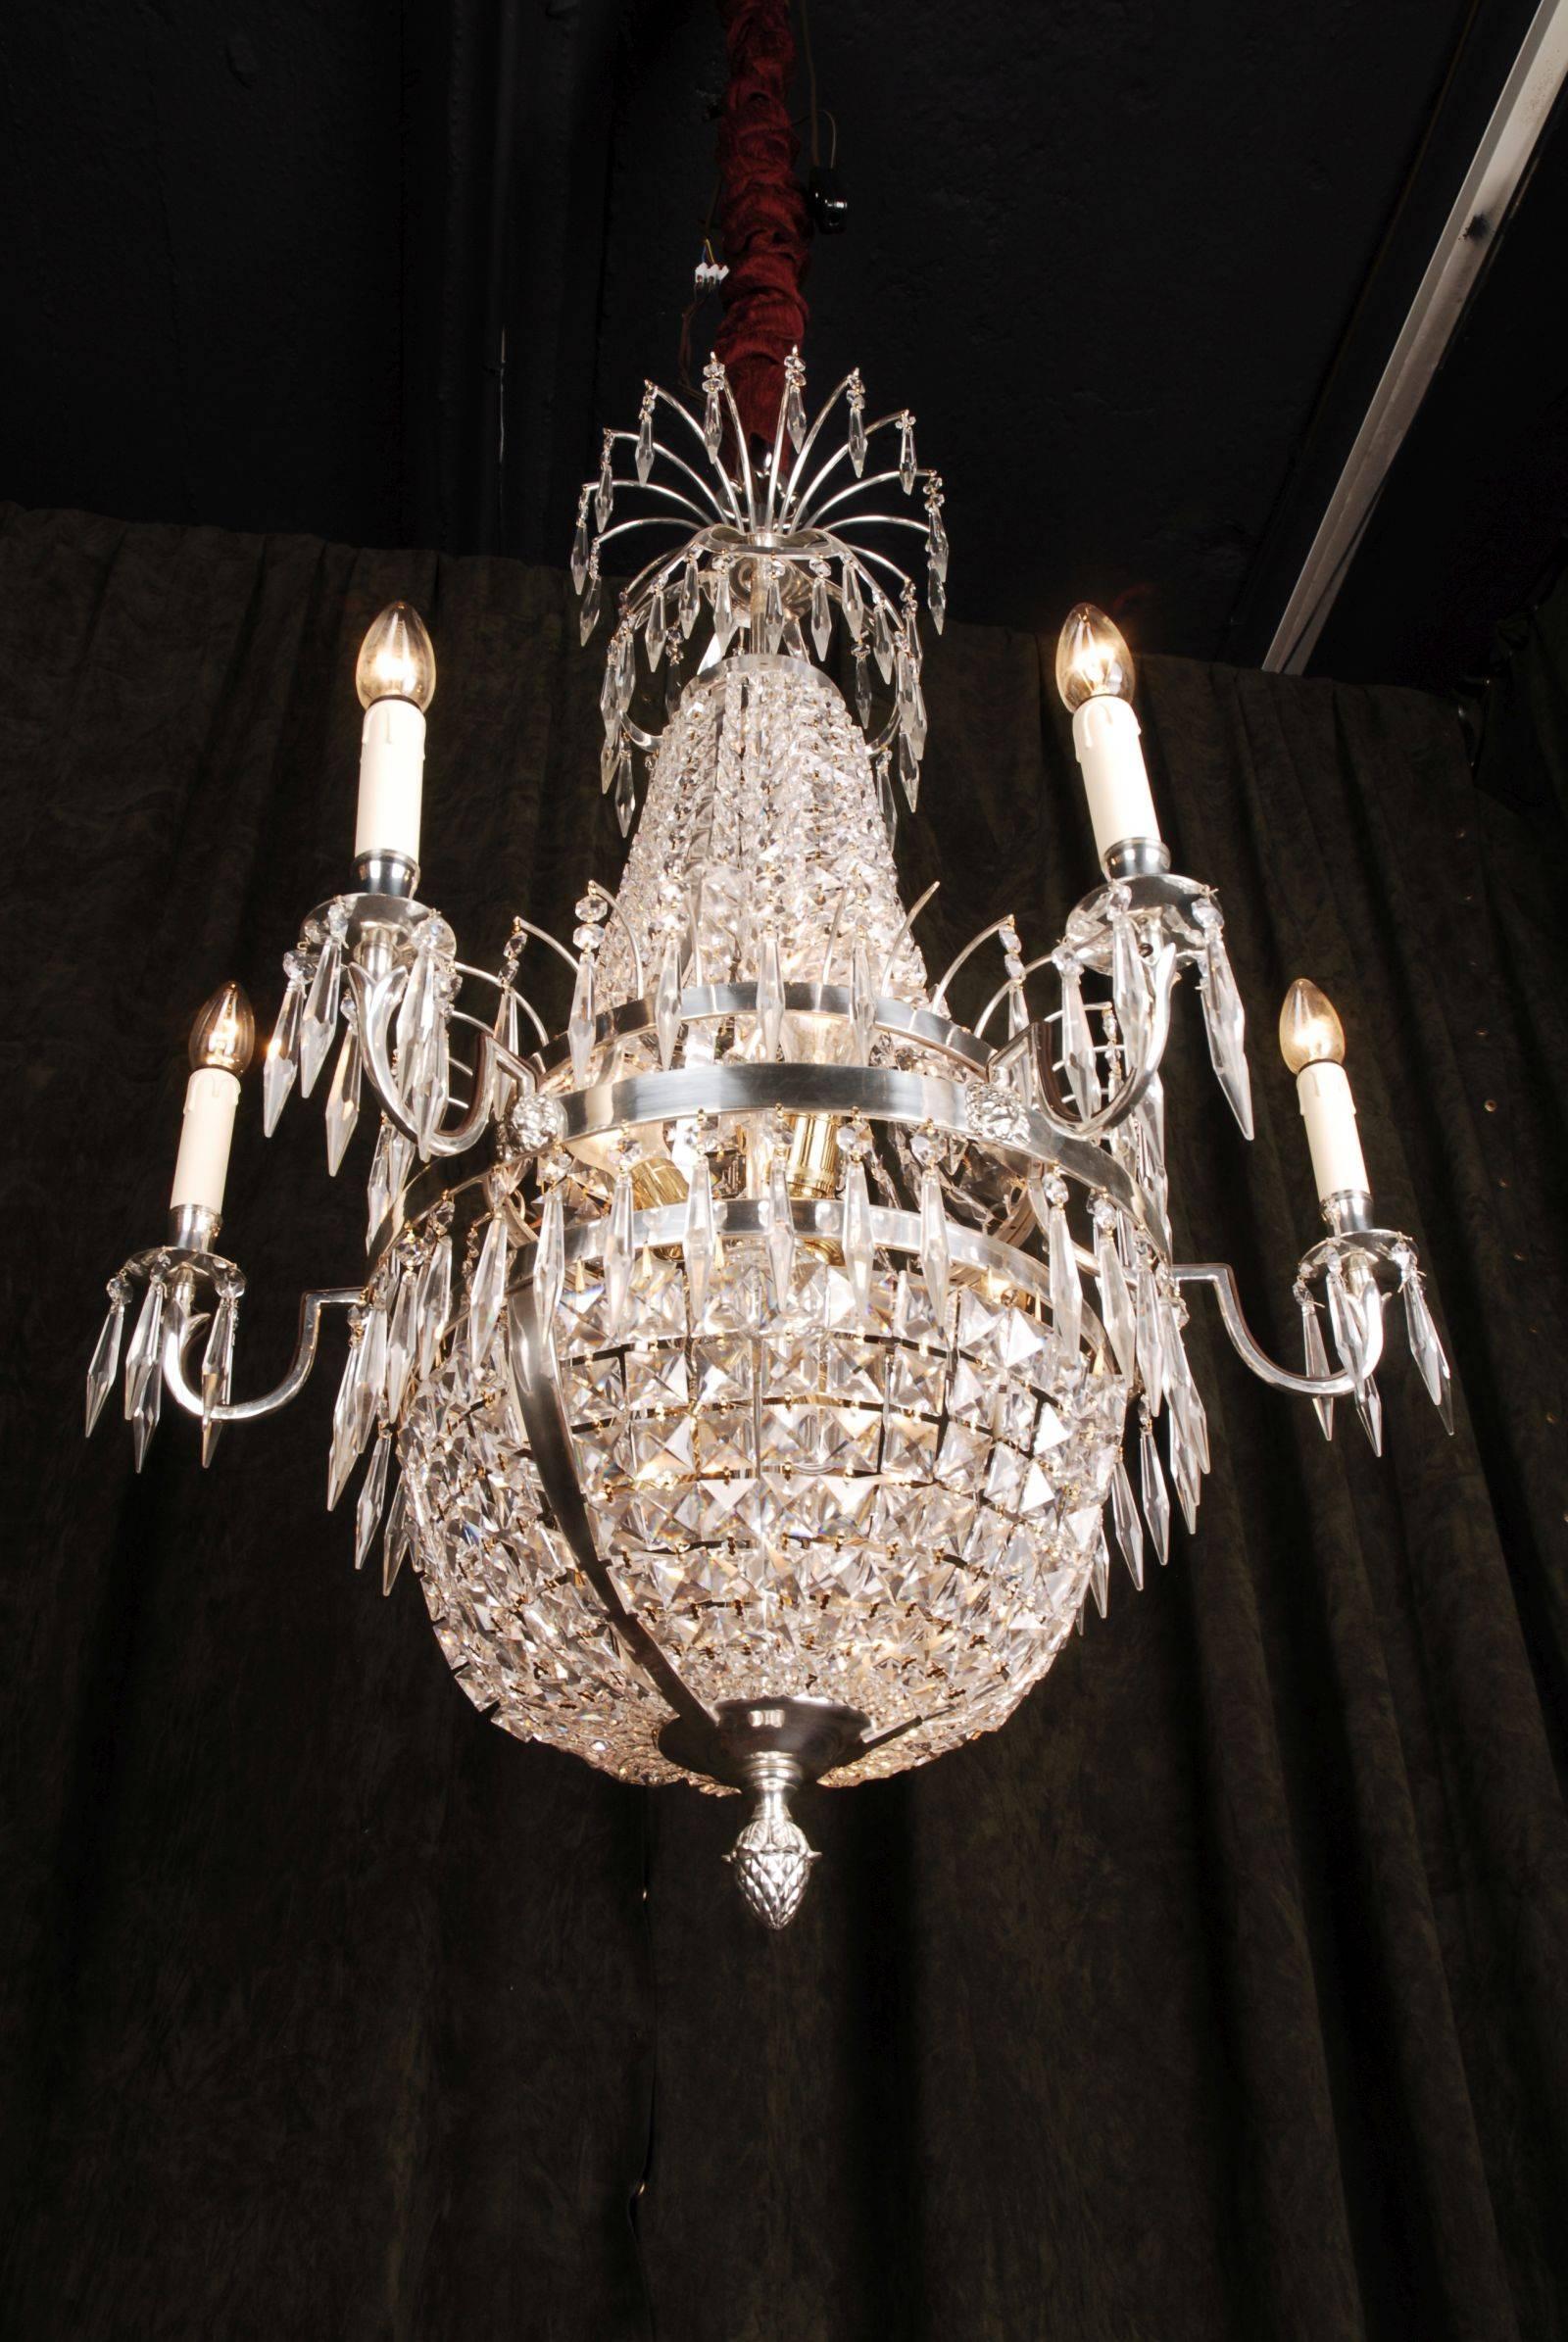 Swedish Empire ceiling candelabra in classicist style.
Polished, silvered brass and facett-ground prism hangings.

(F-Ra-81).